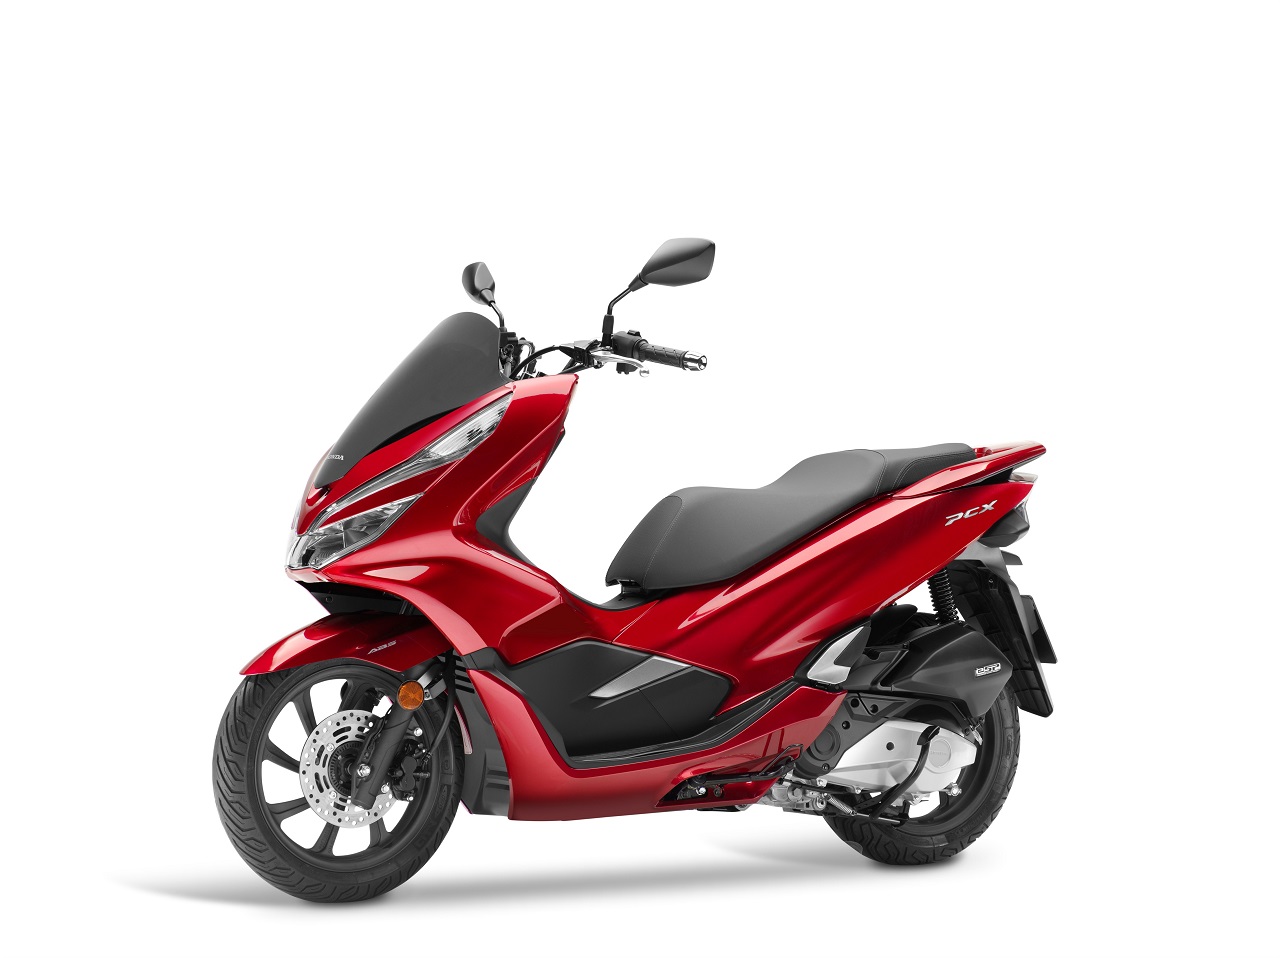 2018 Honda PCX 150 launched in Malaysia, priced at RM 10,999